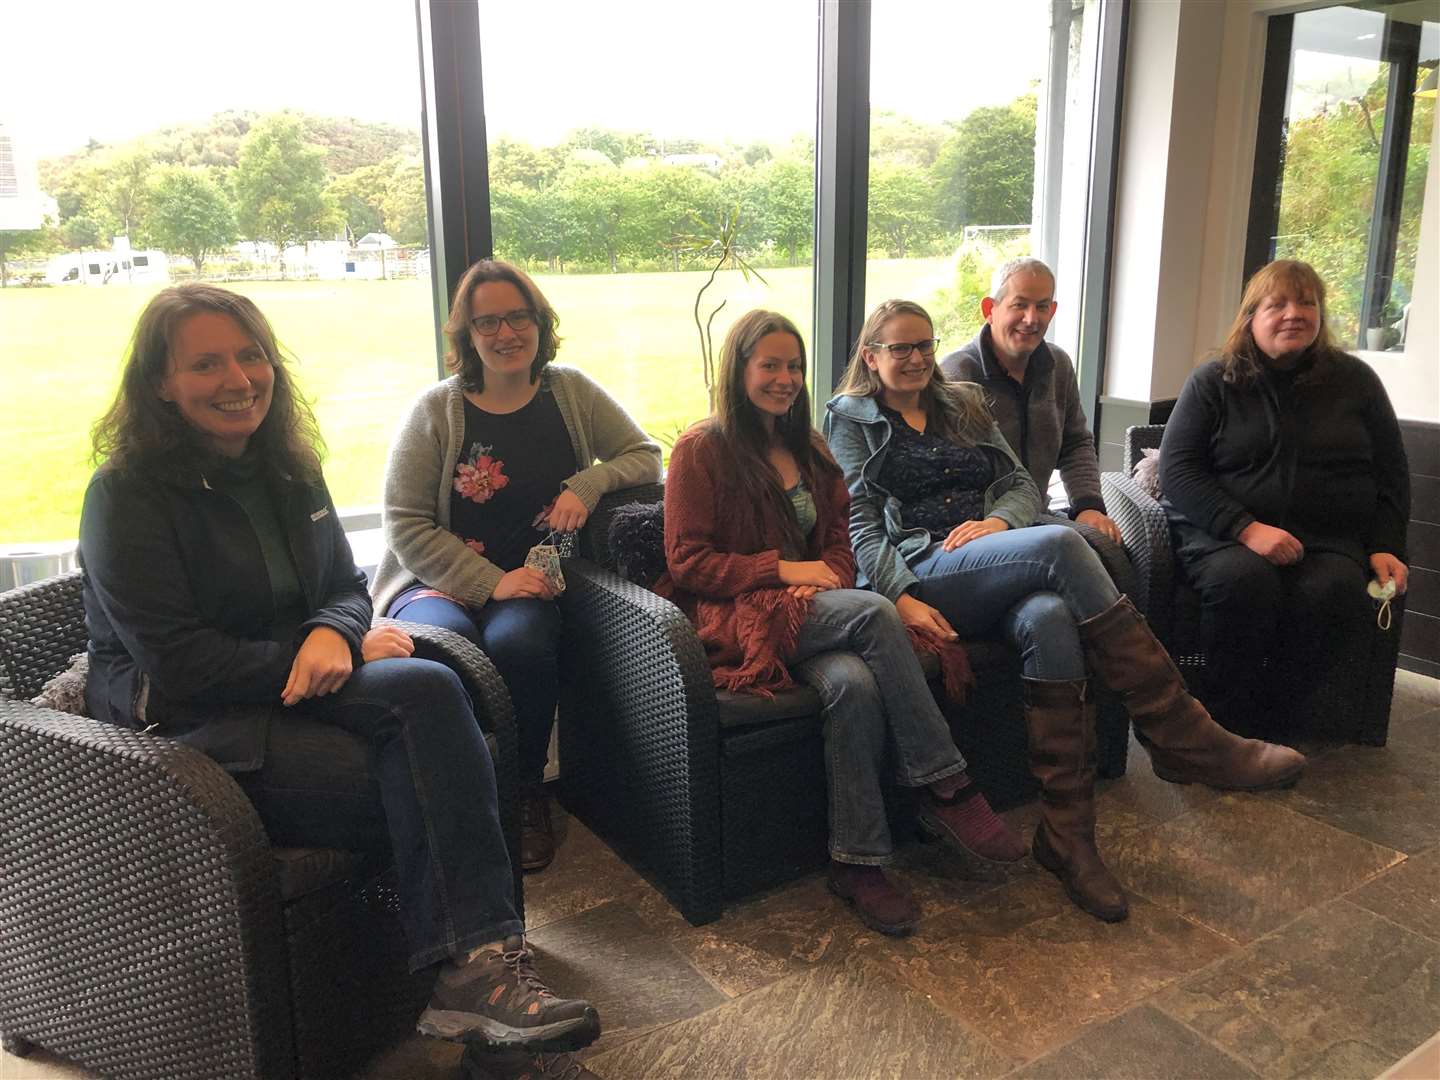 The team got together for a last time at An Cala in Lochinver last week. L to r: Fiona Saywell, Education Manager, Laura Traynor, Assistant Scheme Manager, Kat Martin, Education Manager, Vickii Campen, Training, Events and Volunteer Coordinator, Boyd Alexander, Scheme Manager, and Anne Campbell, Crofting and Rural Projects Coordinator. c. Lizzie Williams